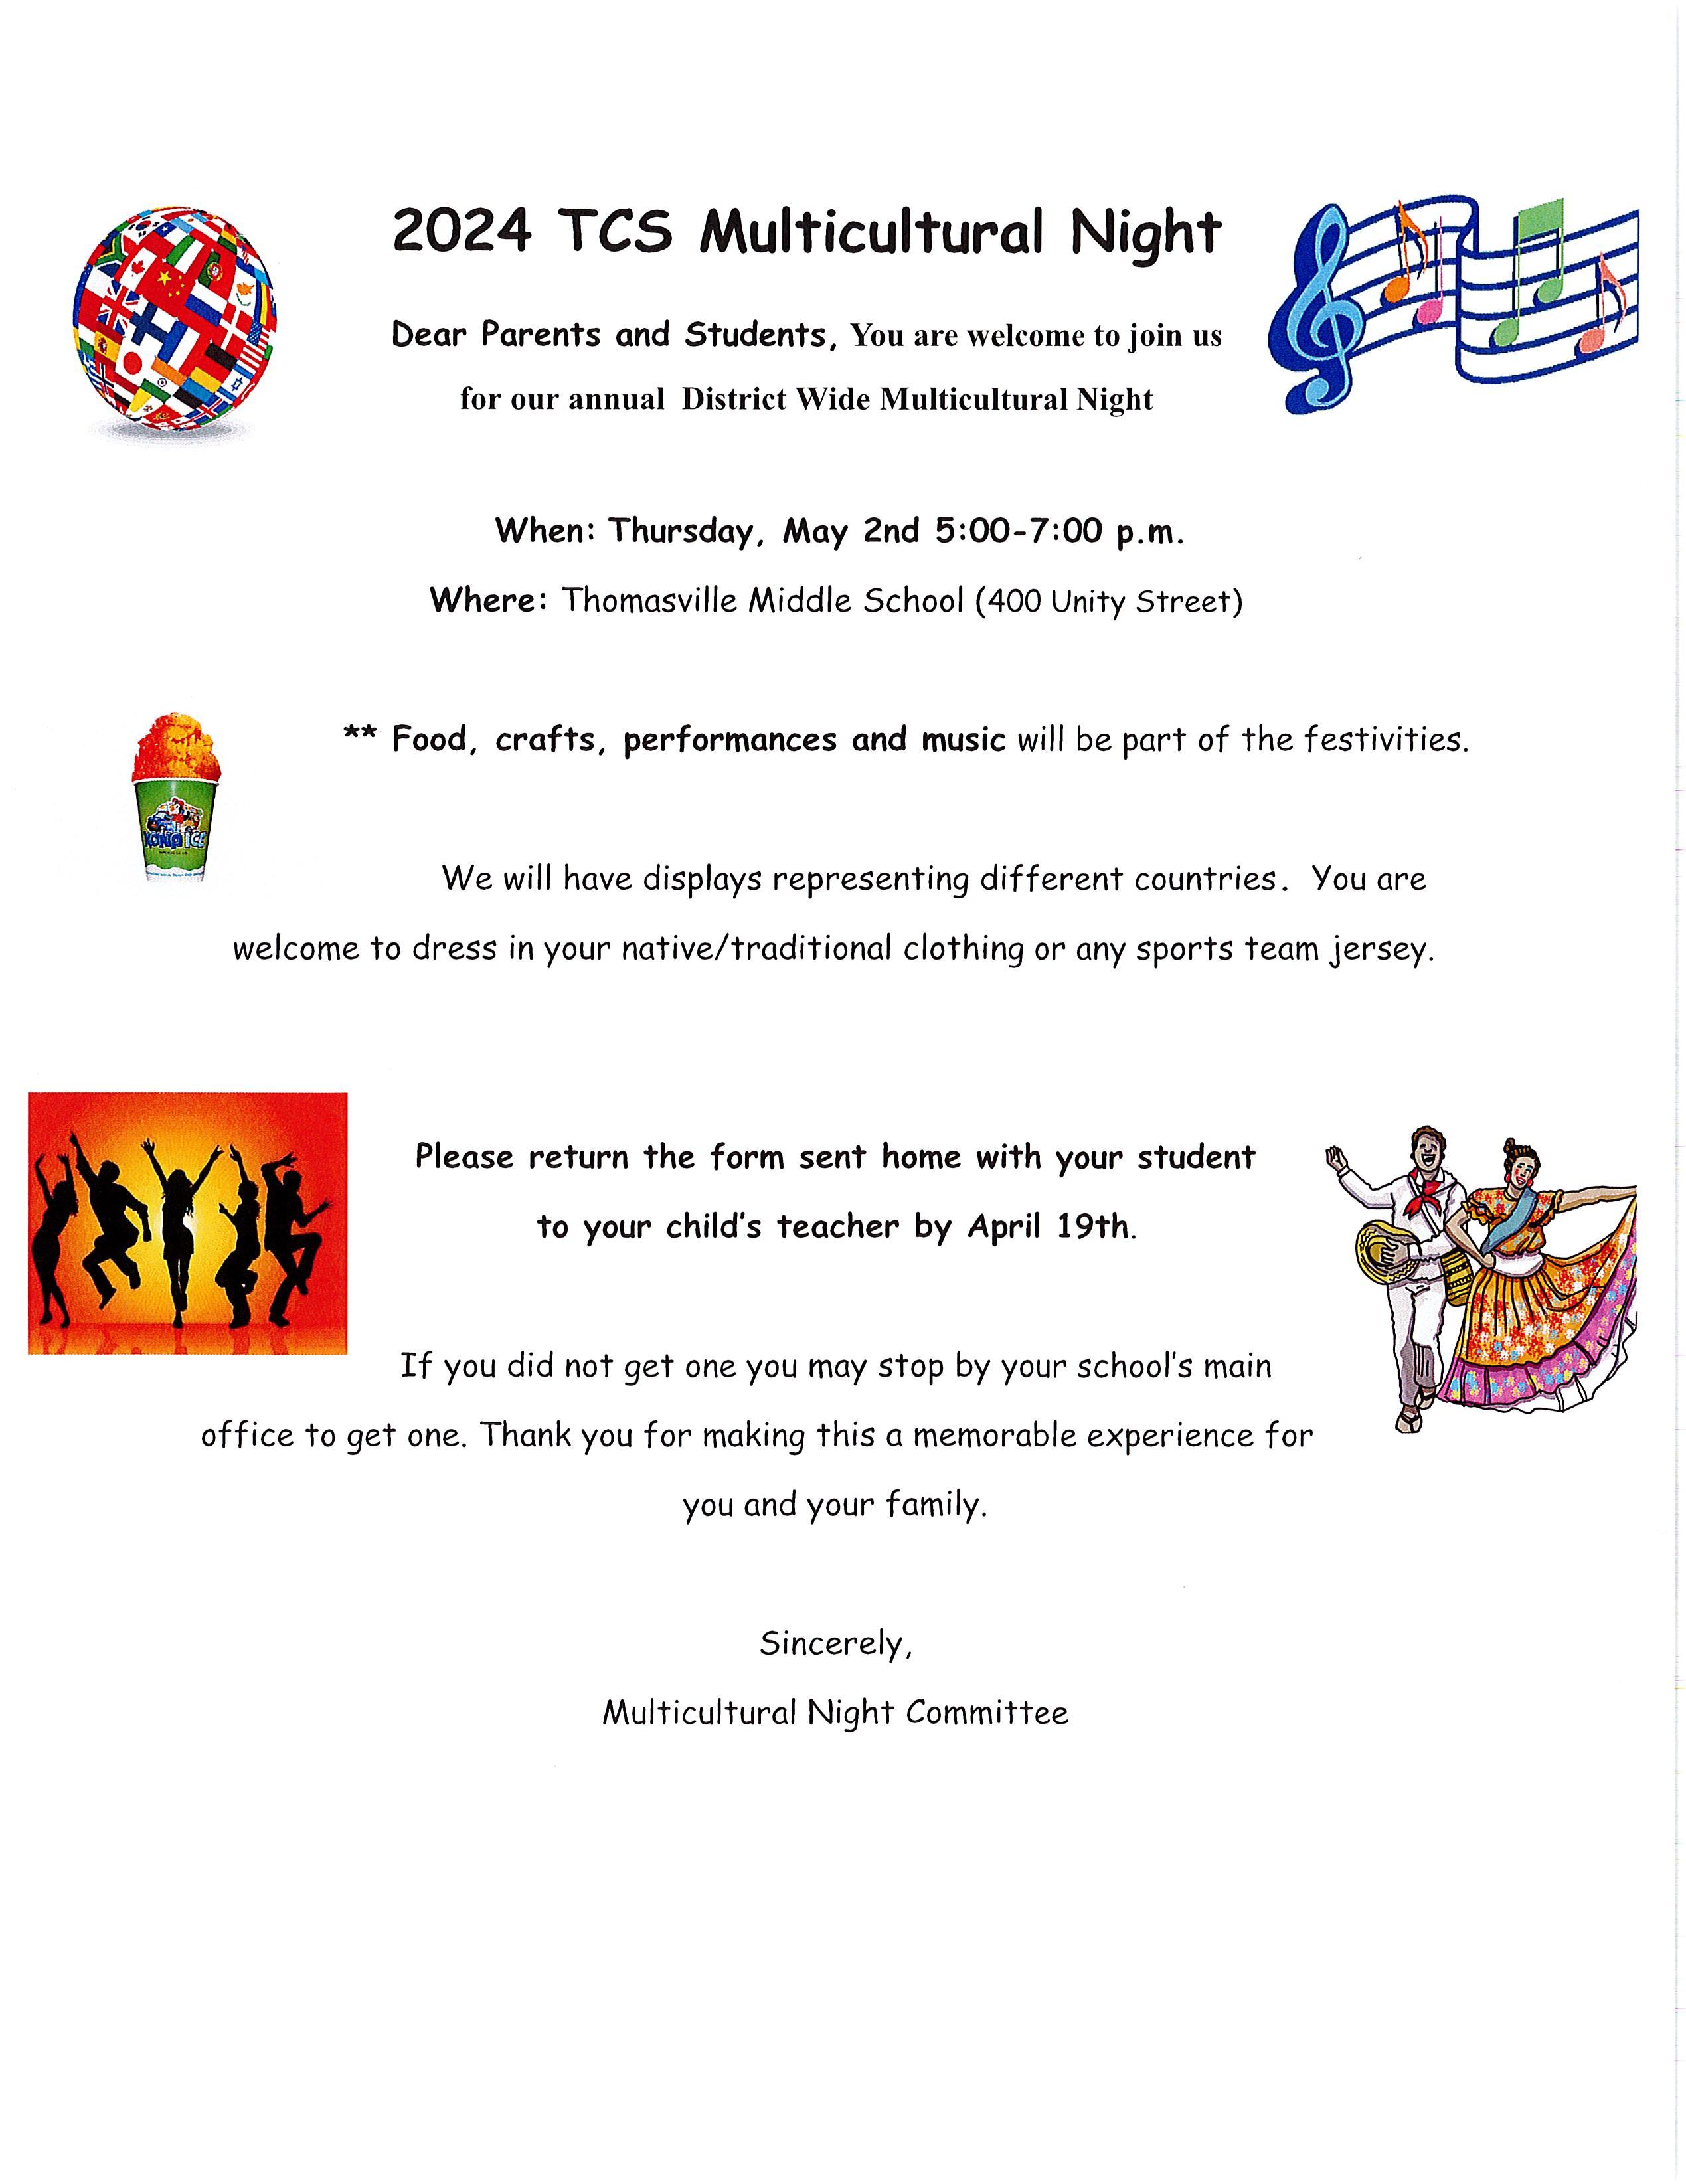 Multicultural Night Info